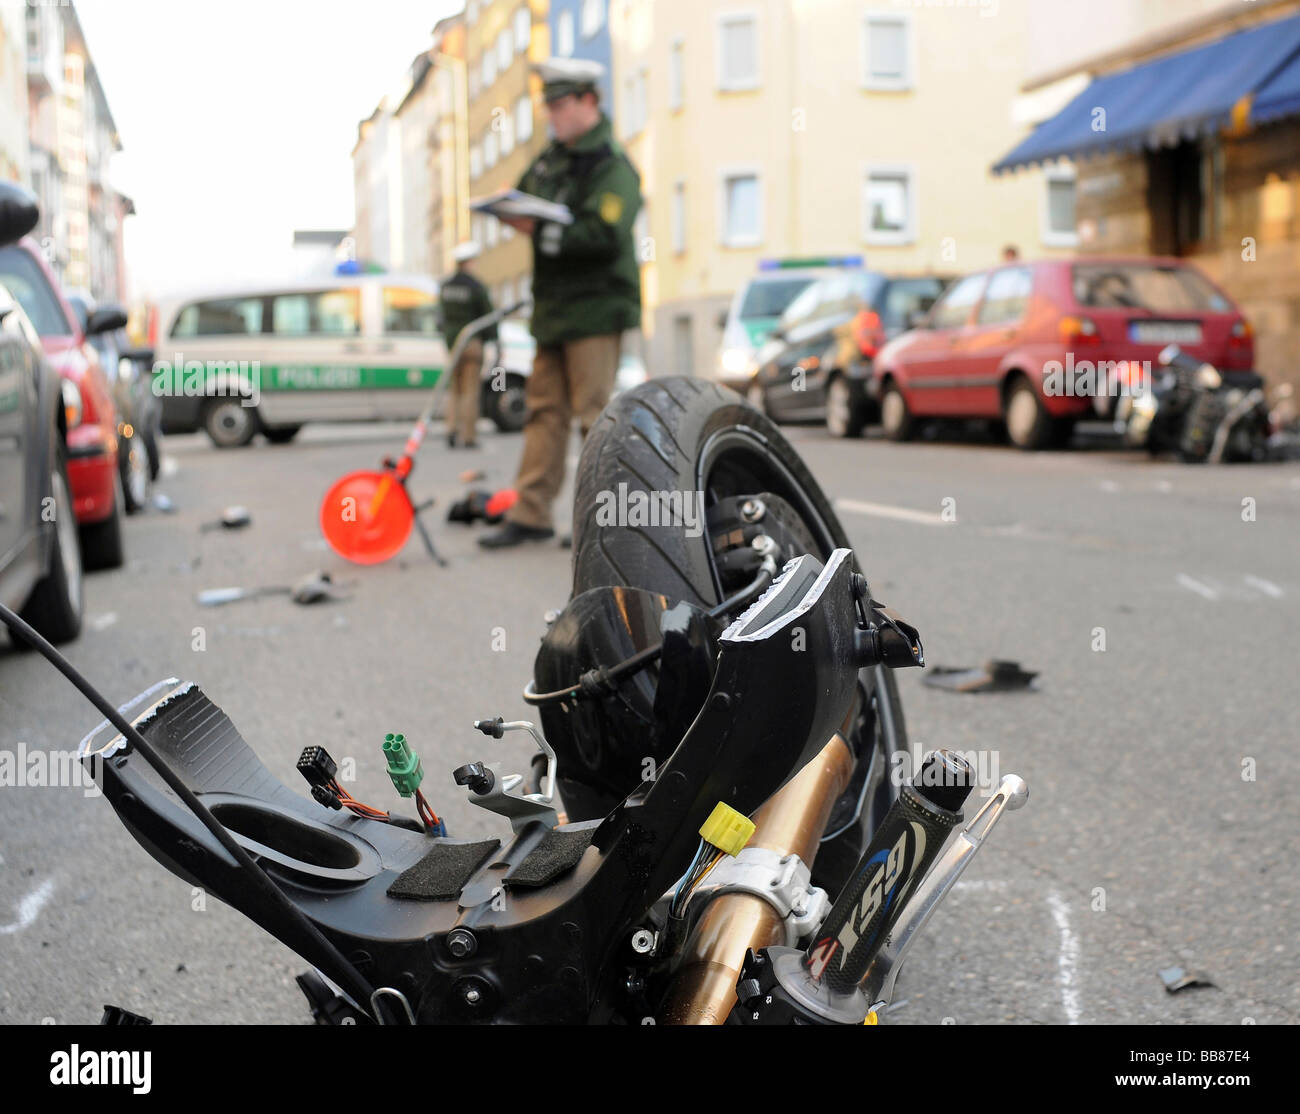 Motorcycle accident with a seriously injured driver, Silberburg/Lerchenstrasse, Stuttgart, Baden-Wuerttemberg, Germany, Europe Stock Photo